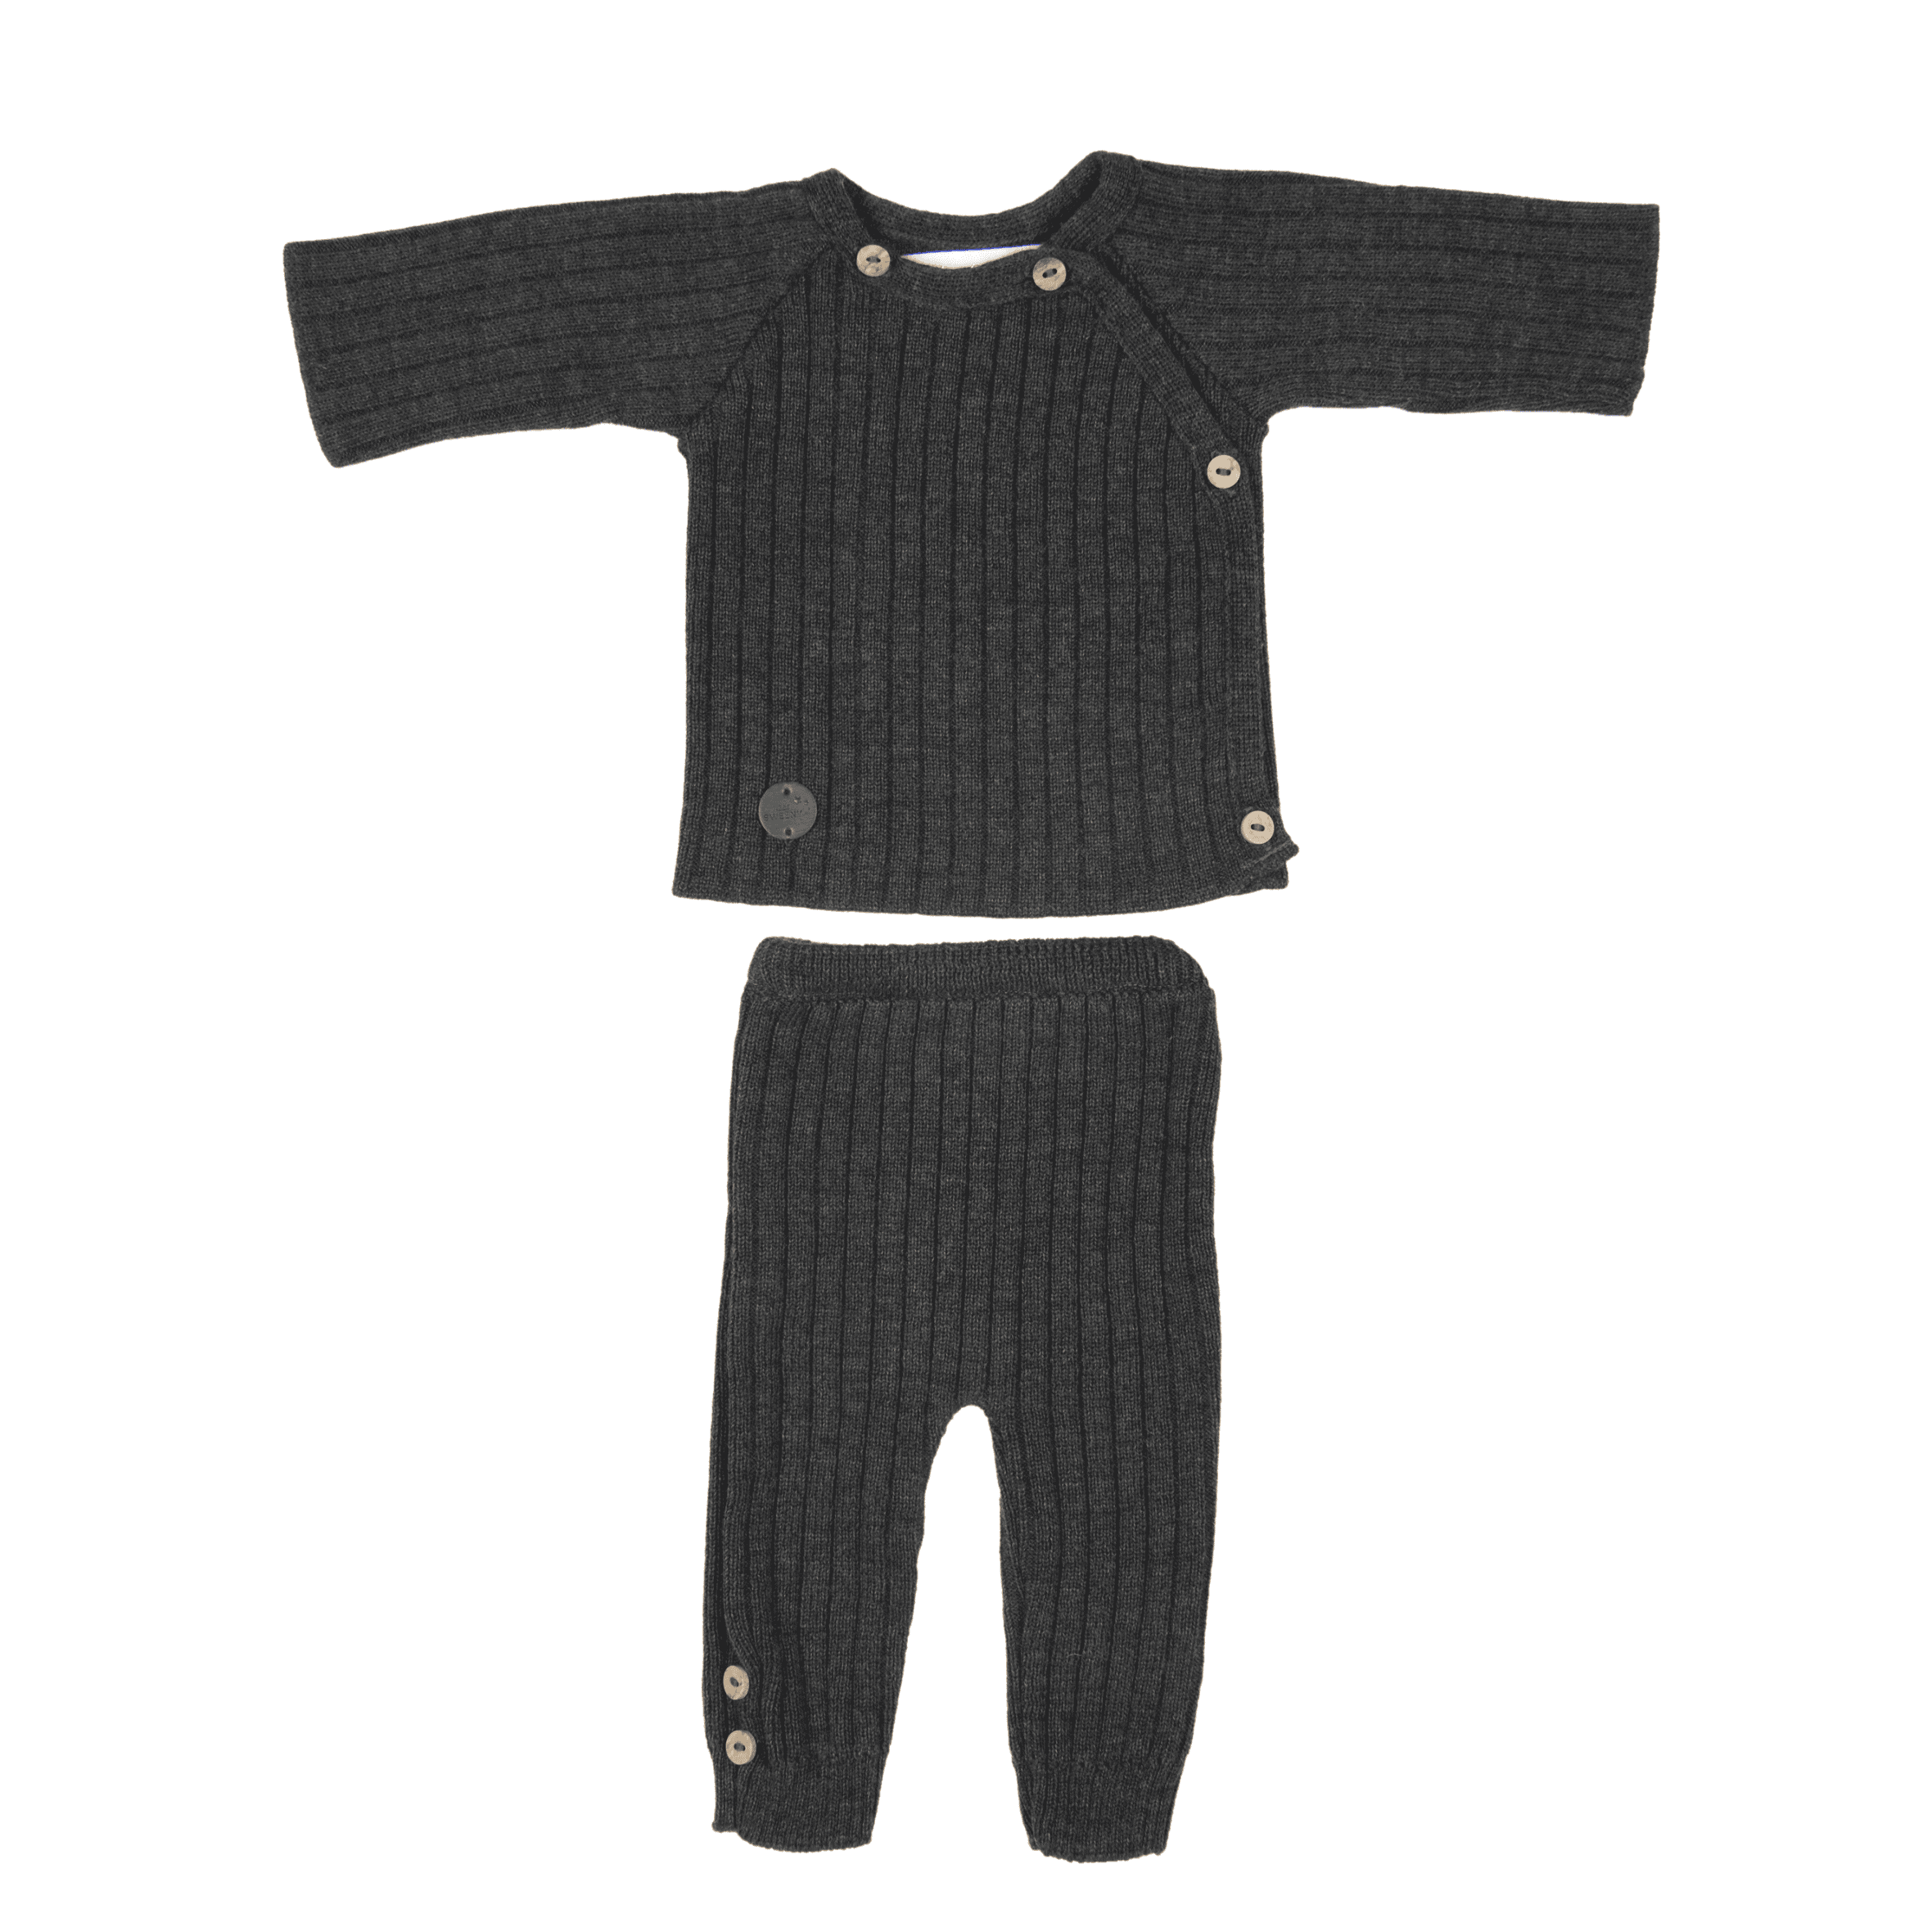 Maille Love | Boys Gift Box | Charcoal Grey Knit Set (5)